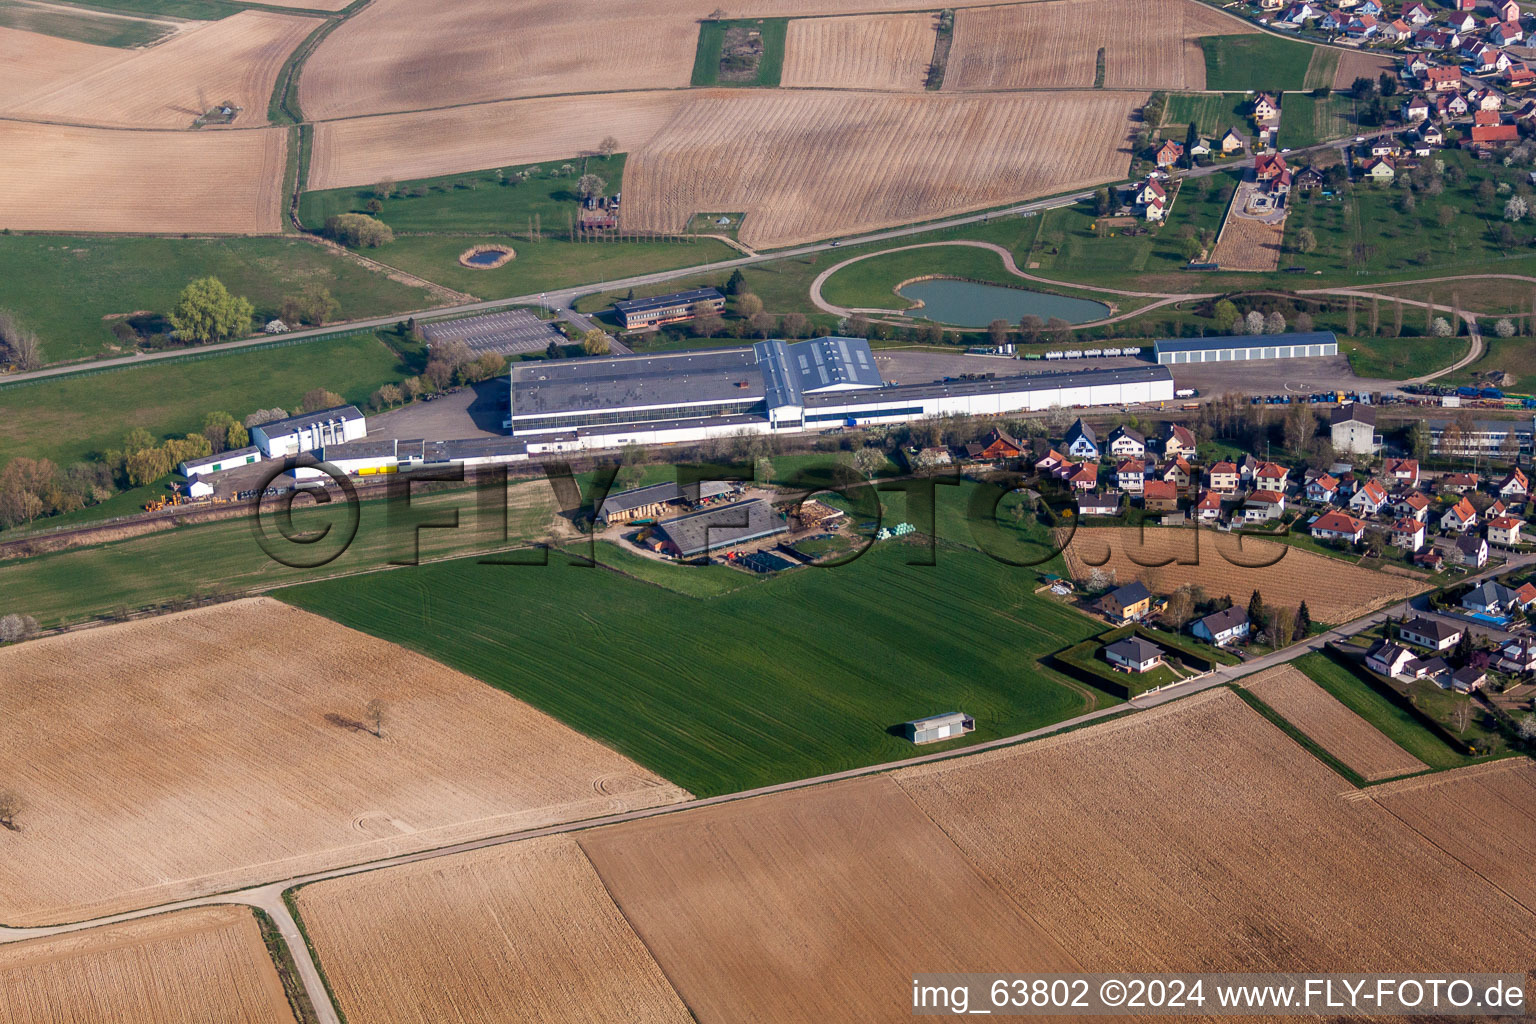 Aerial view of Building and production halls in Soultz-sous-Forets in Grand Est, France